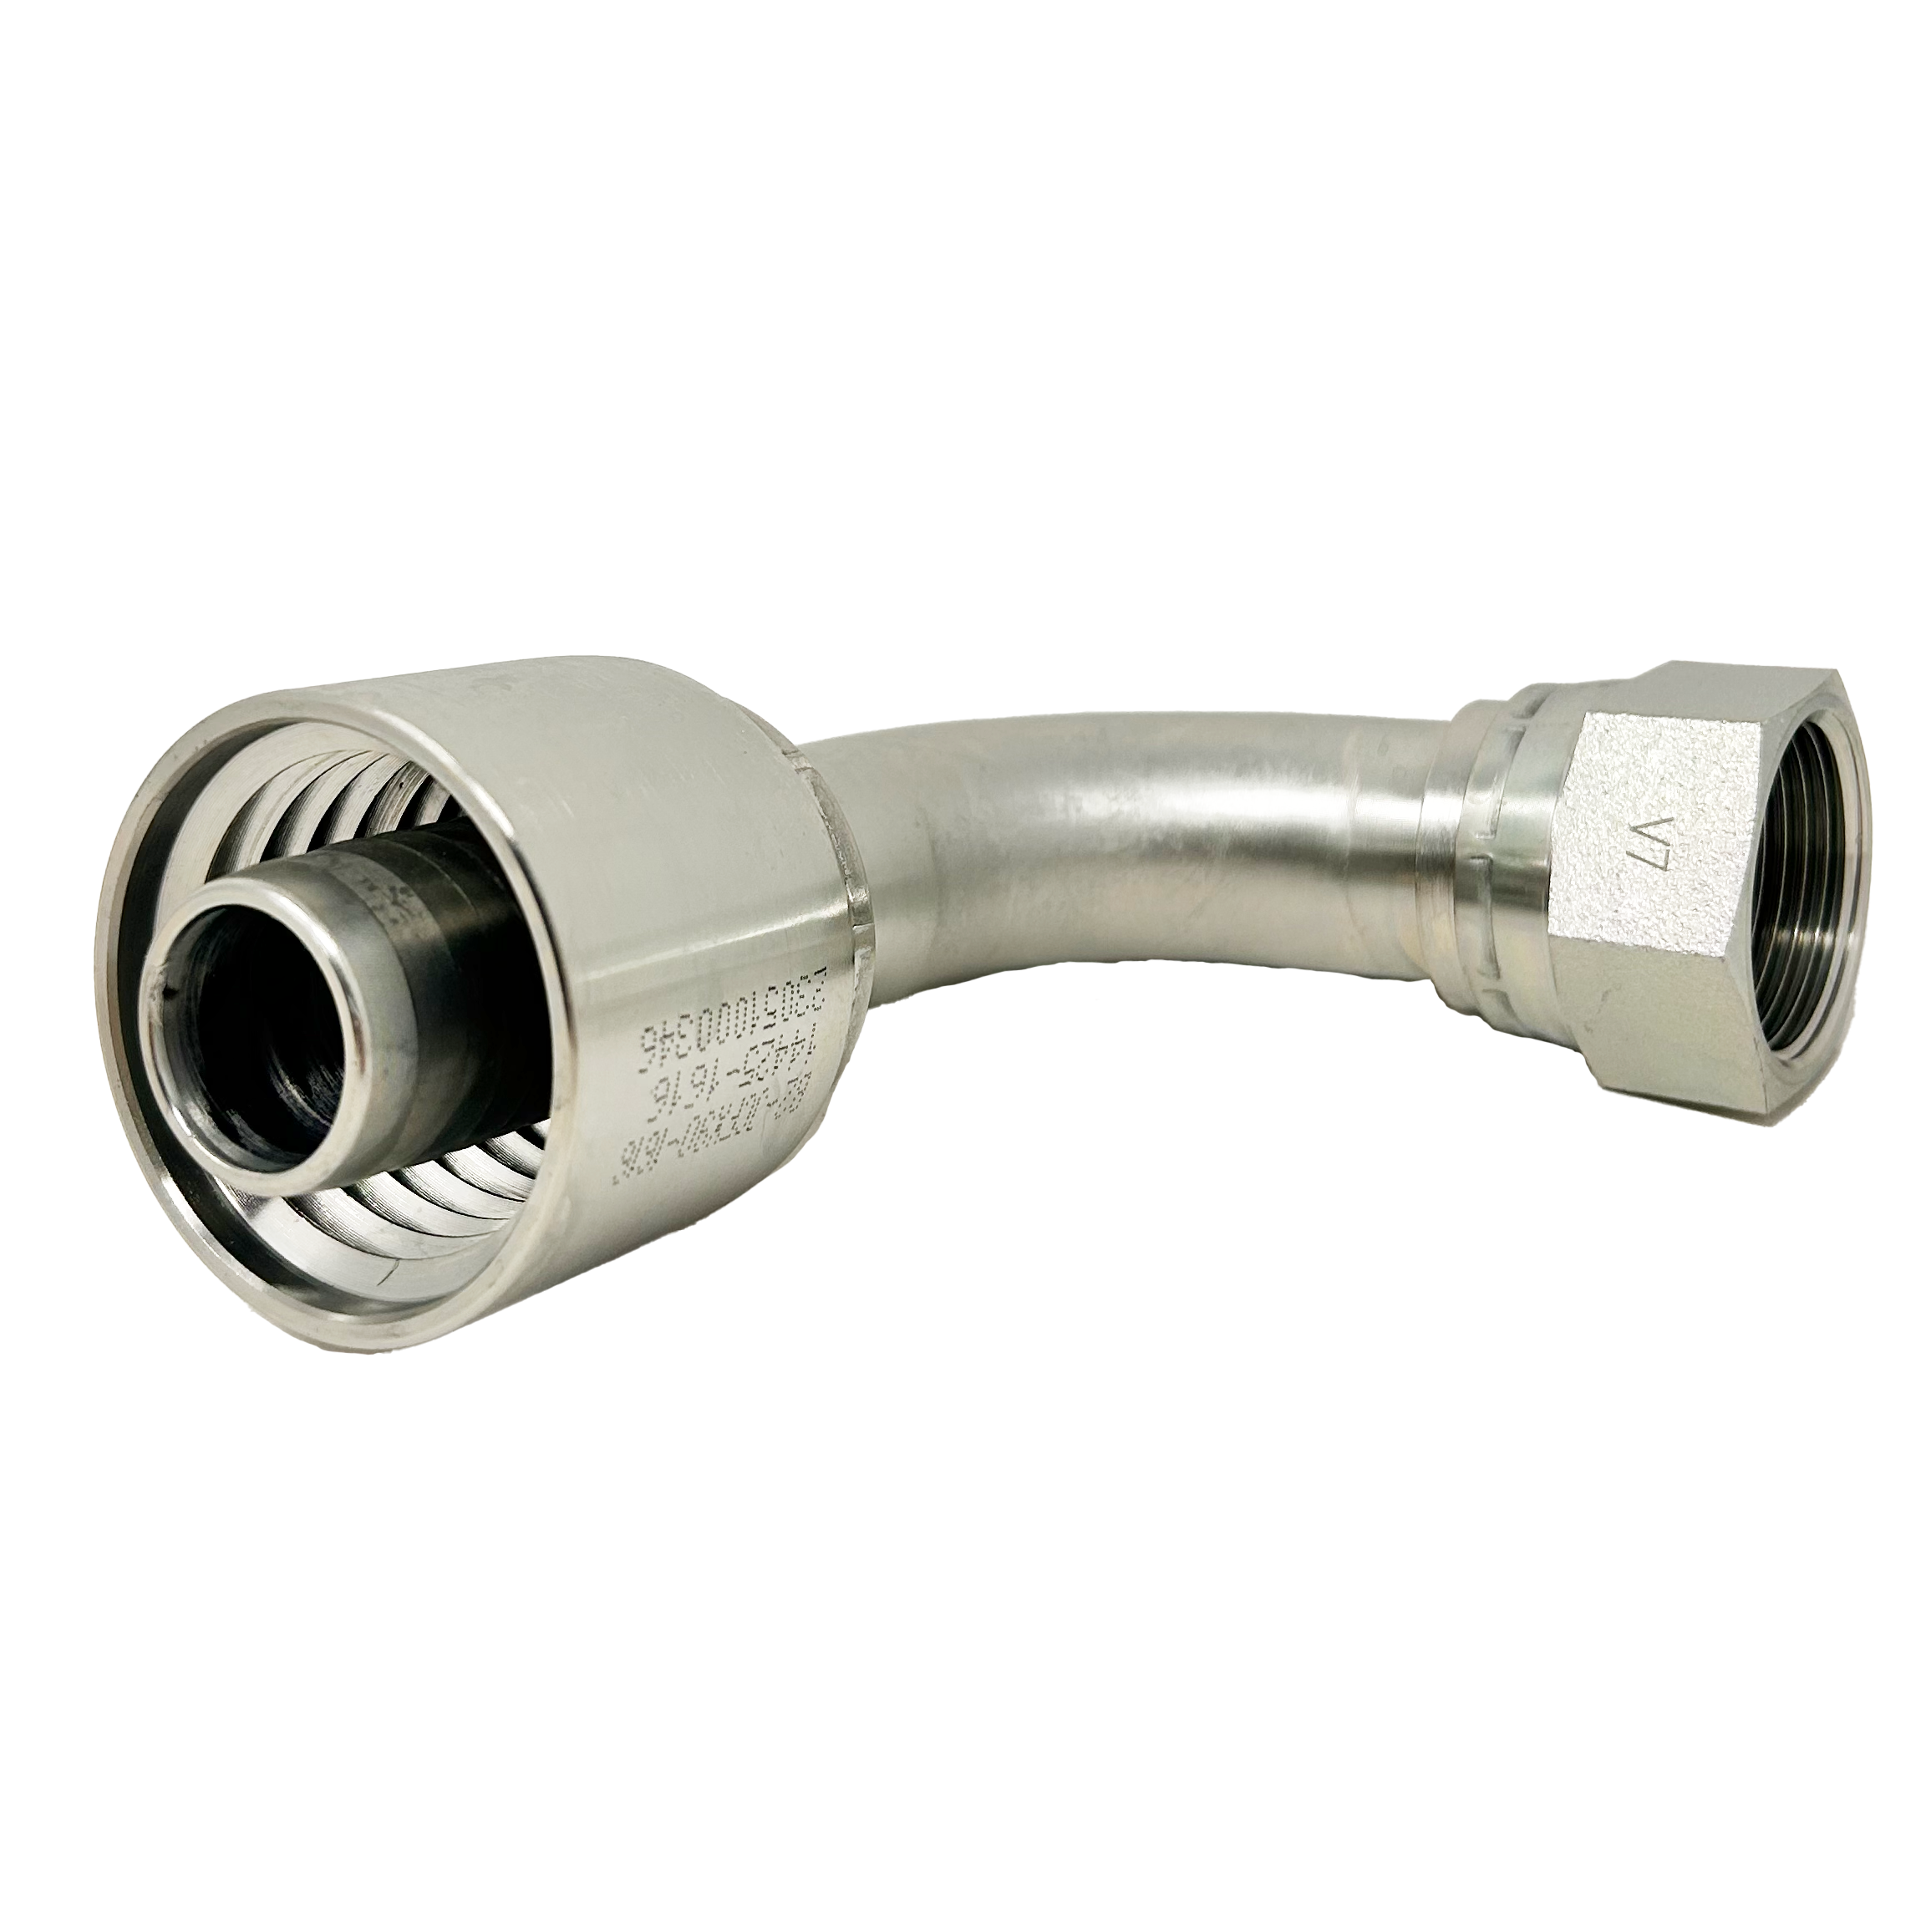 B2-JCFX90-3232S: Continental Hose Fitting, 2" Hose ID x 2-1/2-12 Female JIC, 90-Degree Swivel Connection